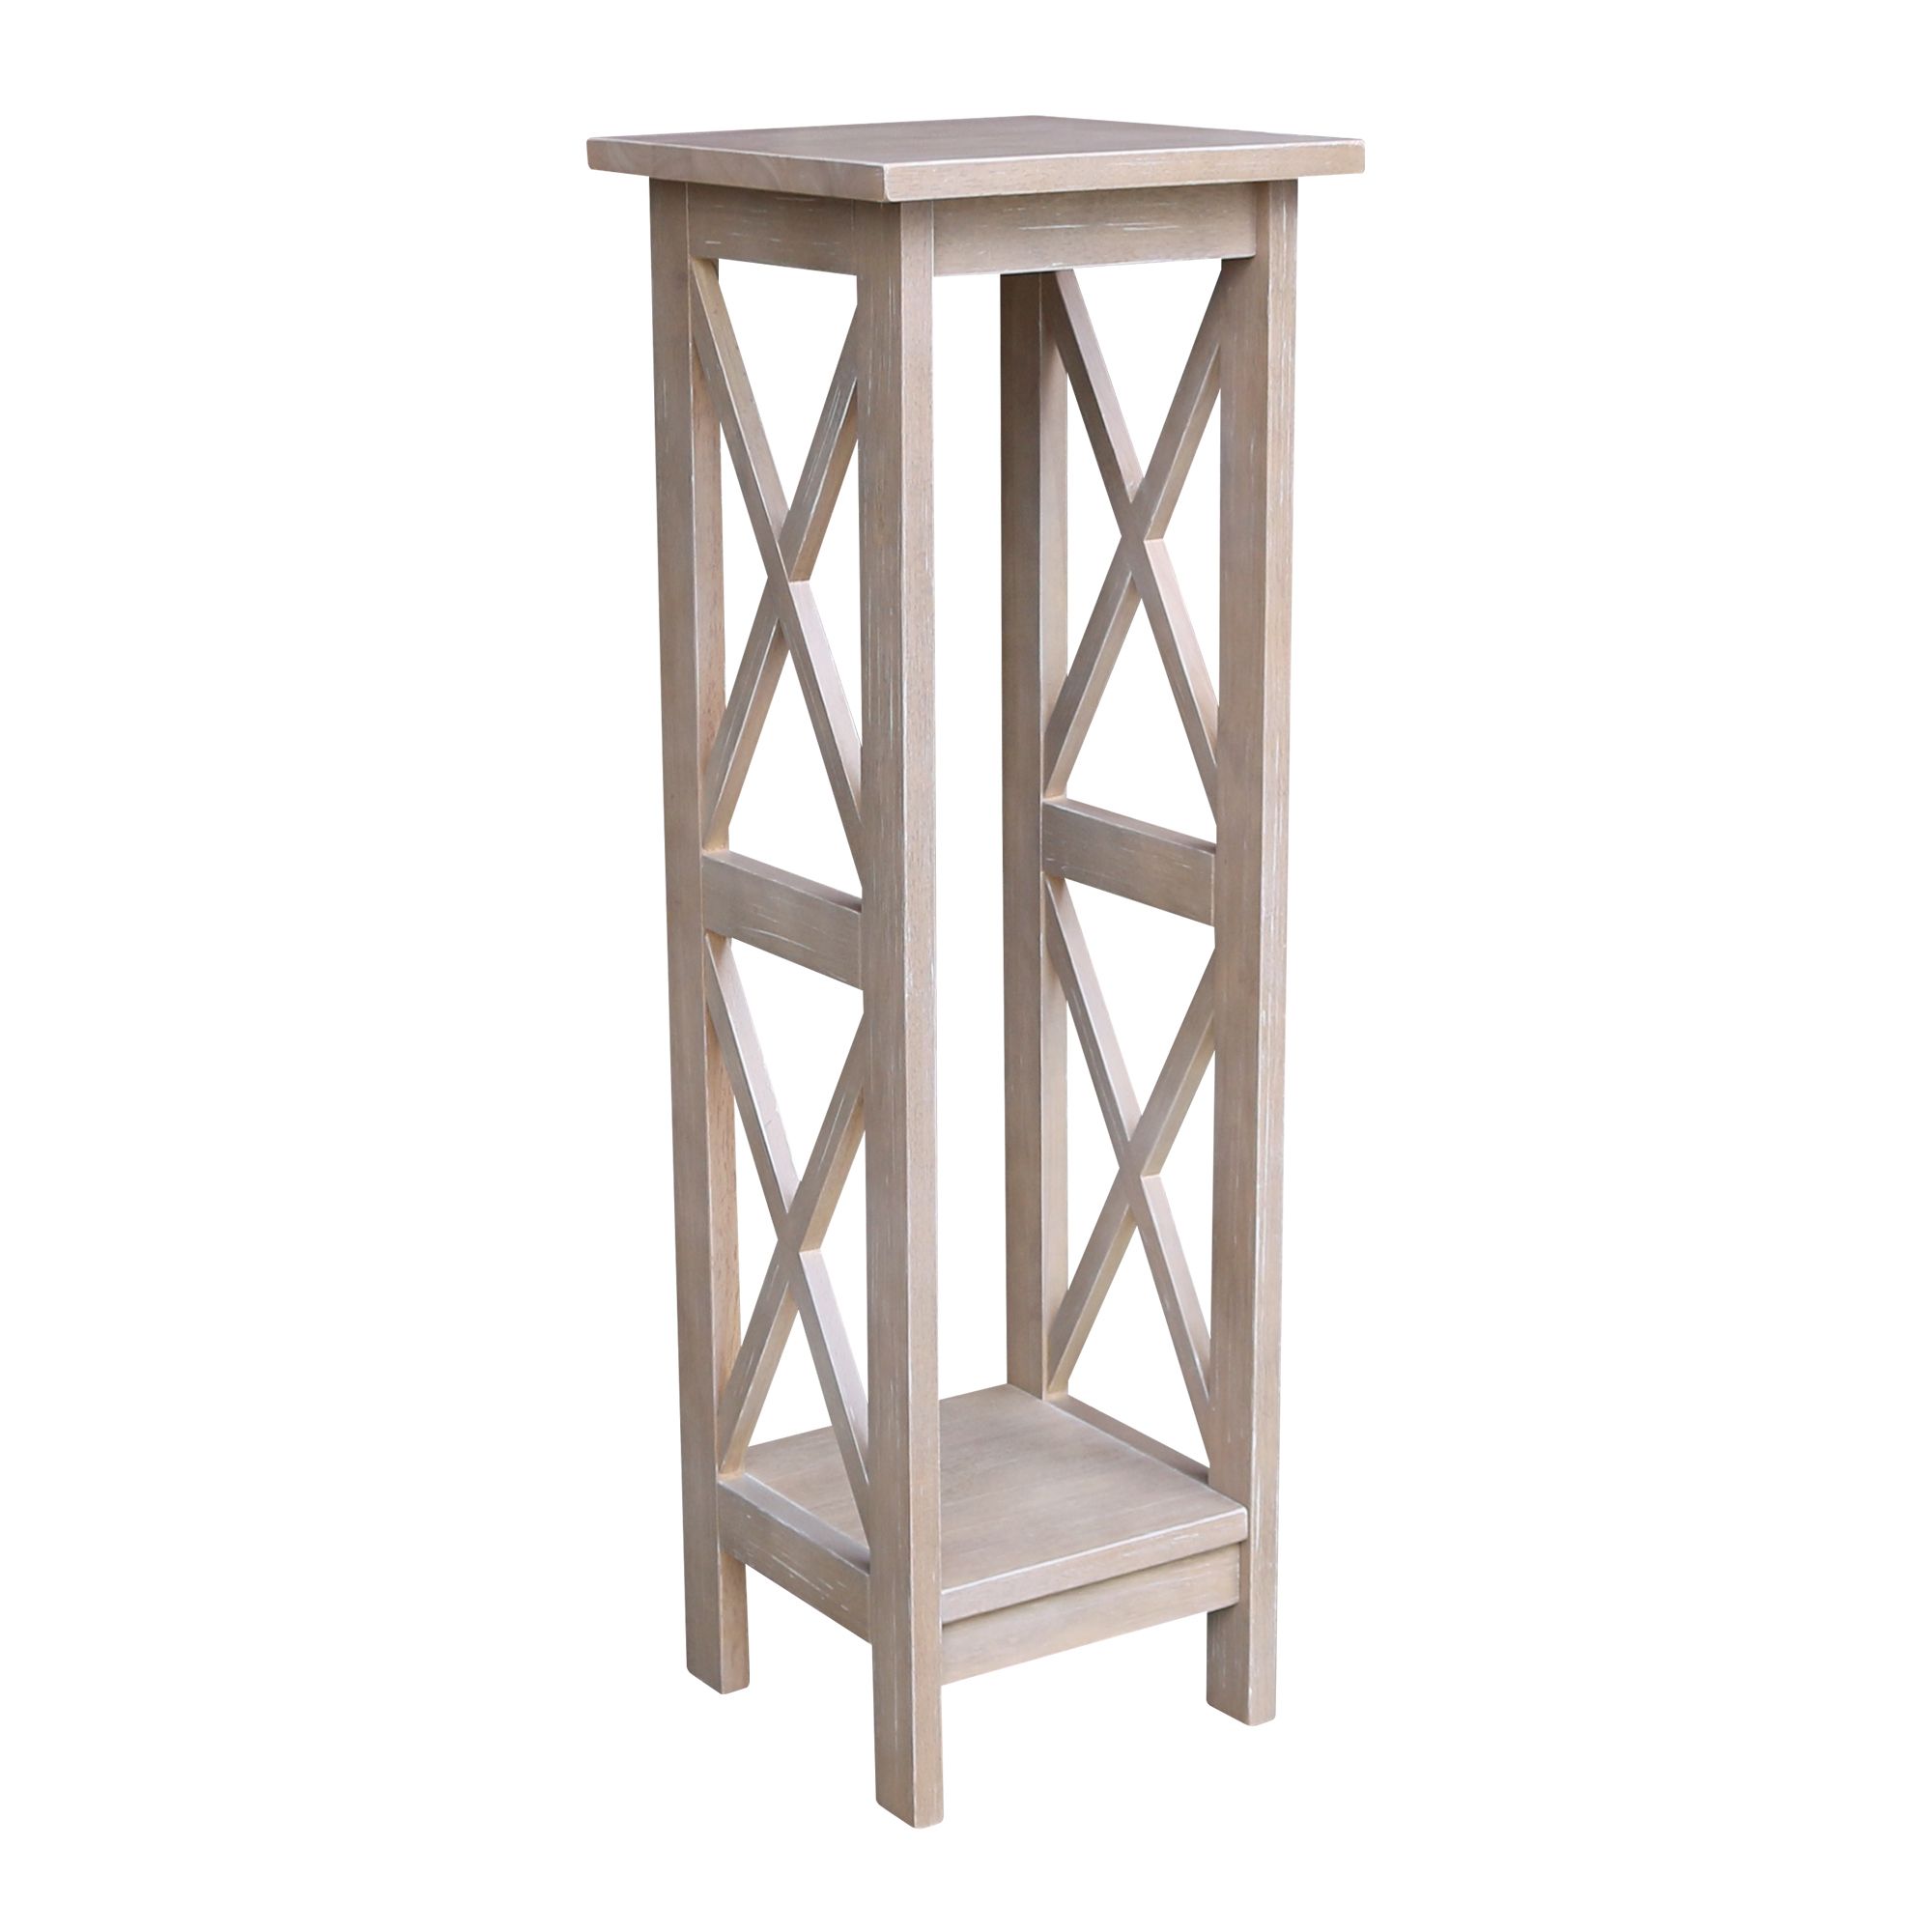 Solid Wood X Sided Plant Stand In Washed Gray Taupe – Walmart Throughout Popular Weathered Gray Plant Stands (View 8 of 15)